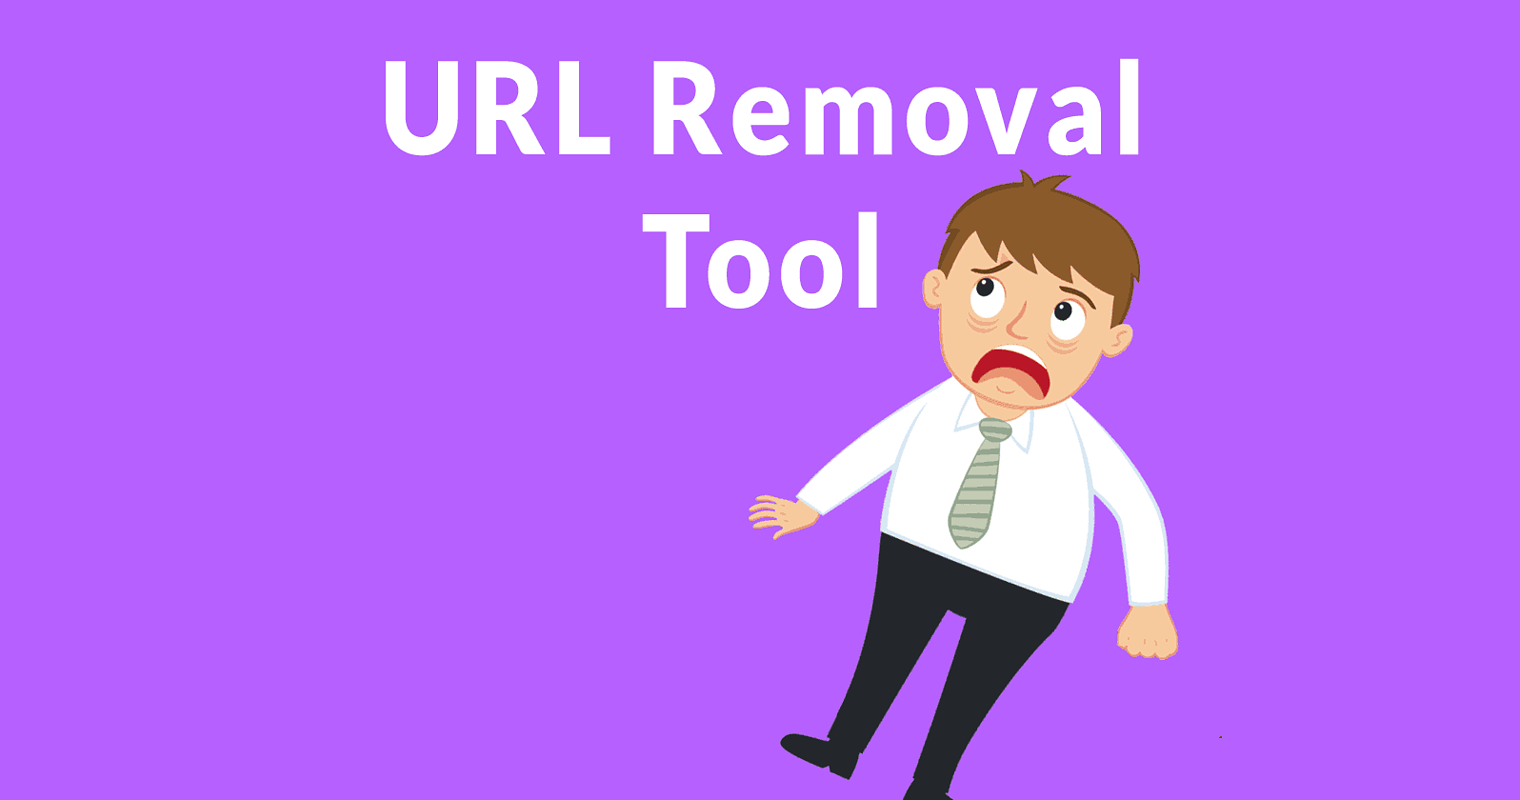 Publishers Report Possible URL Removal Tool Bug – No Word from Google